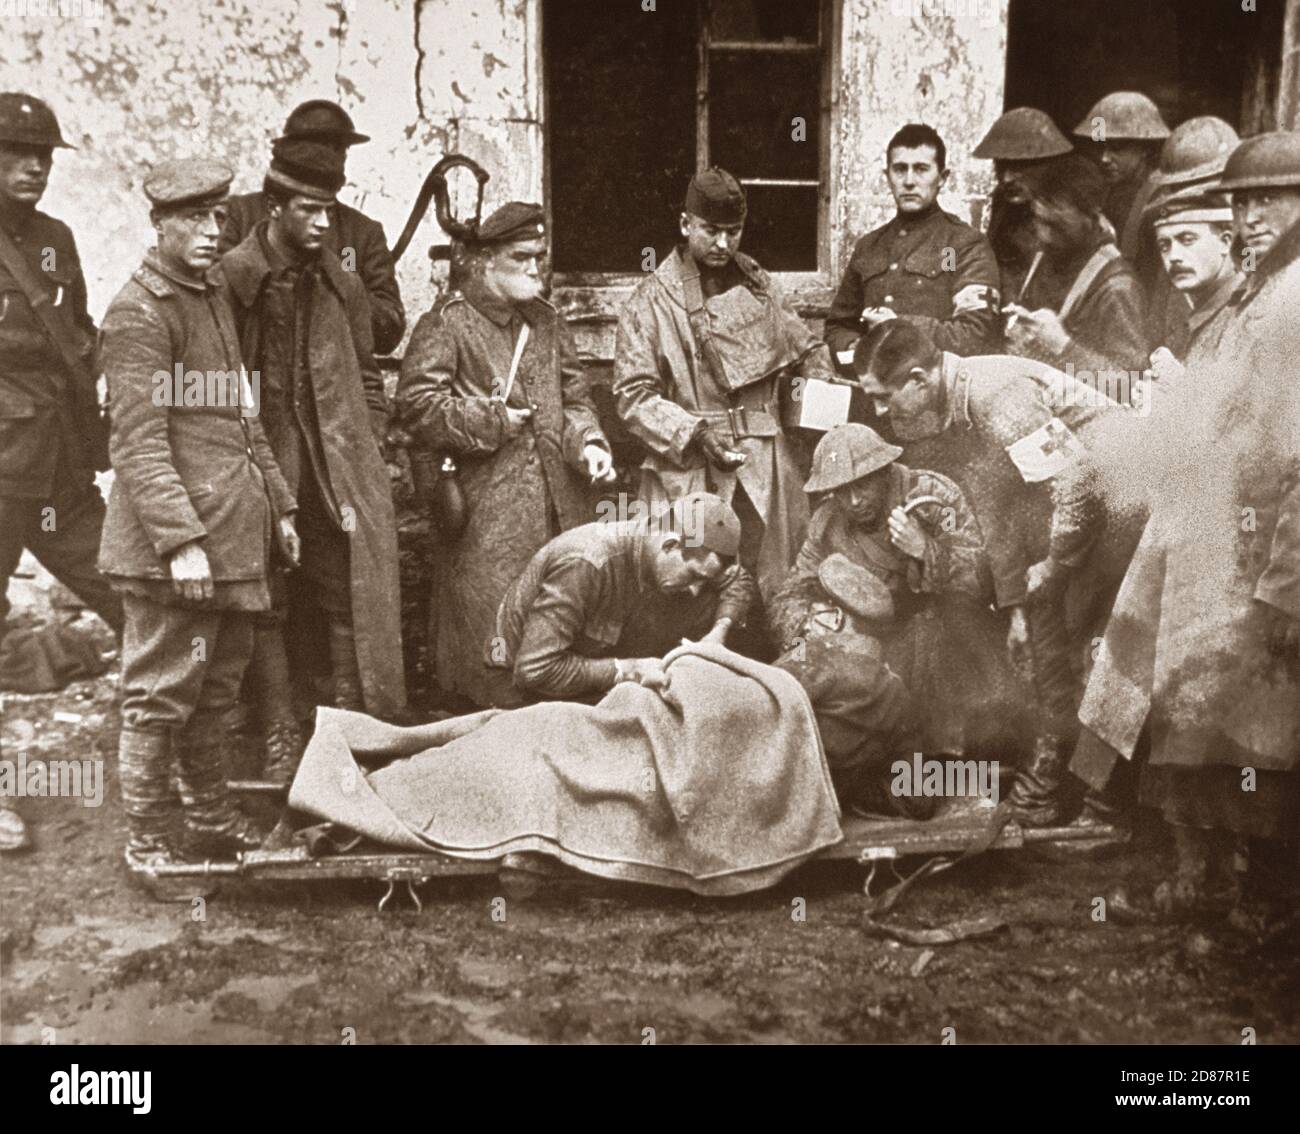 Lieutenant C.S. Darley, a Catholic chaplain, treating German officer lying on Stretcher outside Building, 89th Division Dressing Station, near Remonville, France, U.S. Army Signal Corps, November 2, 1918 Stock Photo